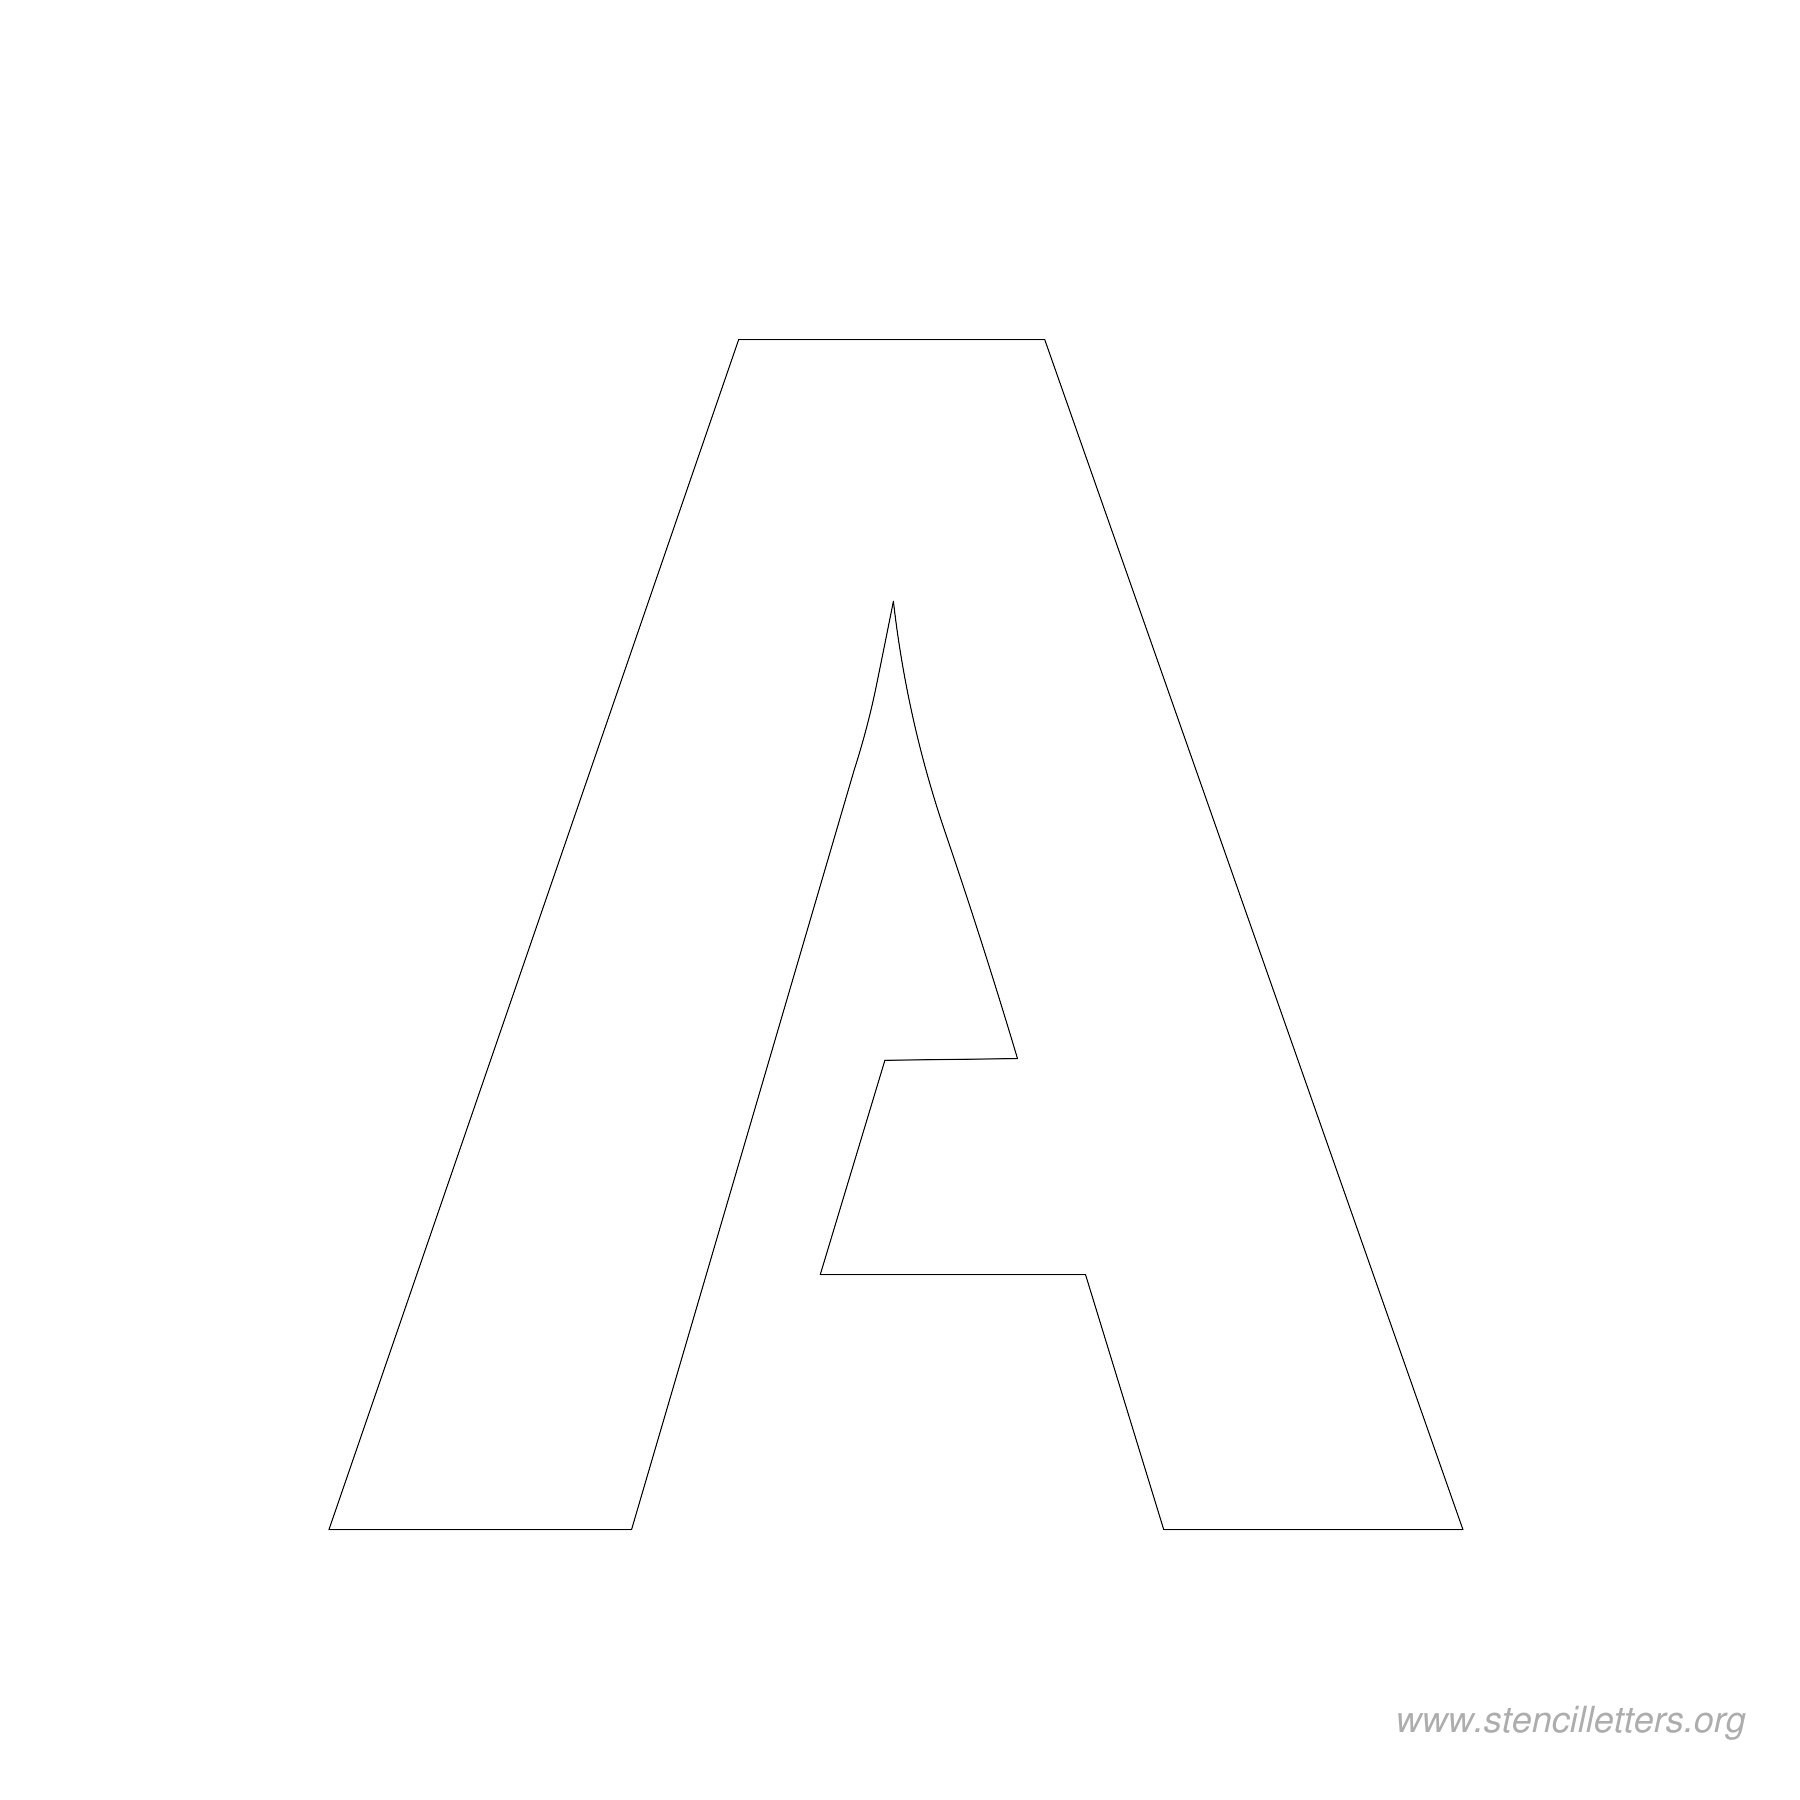 4 Inch Printable Alphabet Letters Templates   Bing images | Crafts 